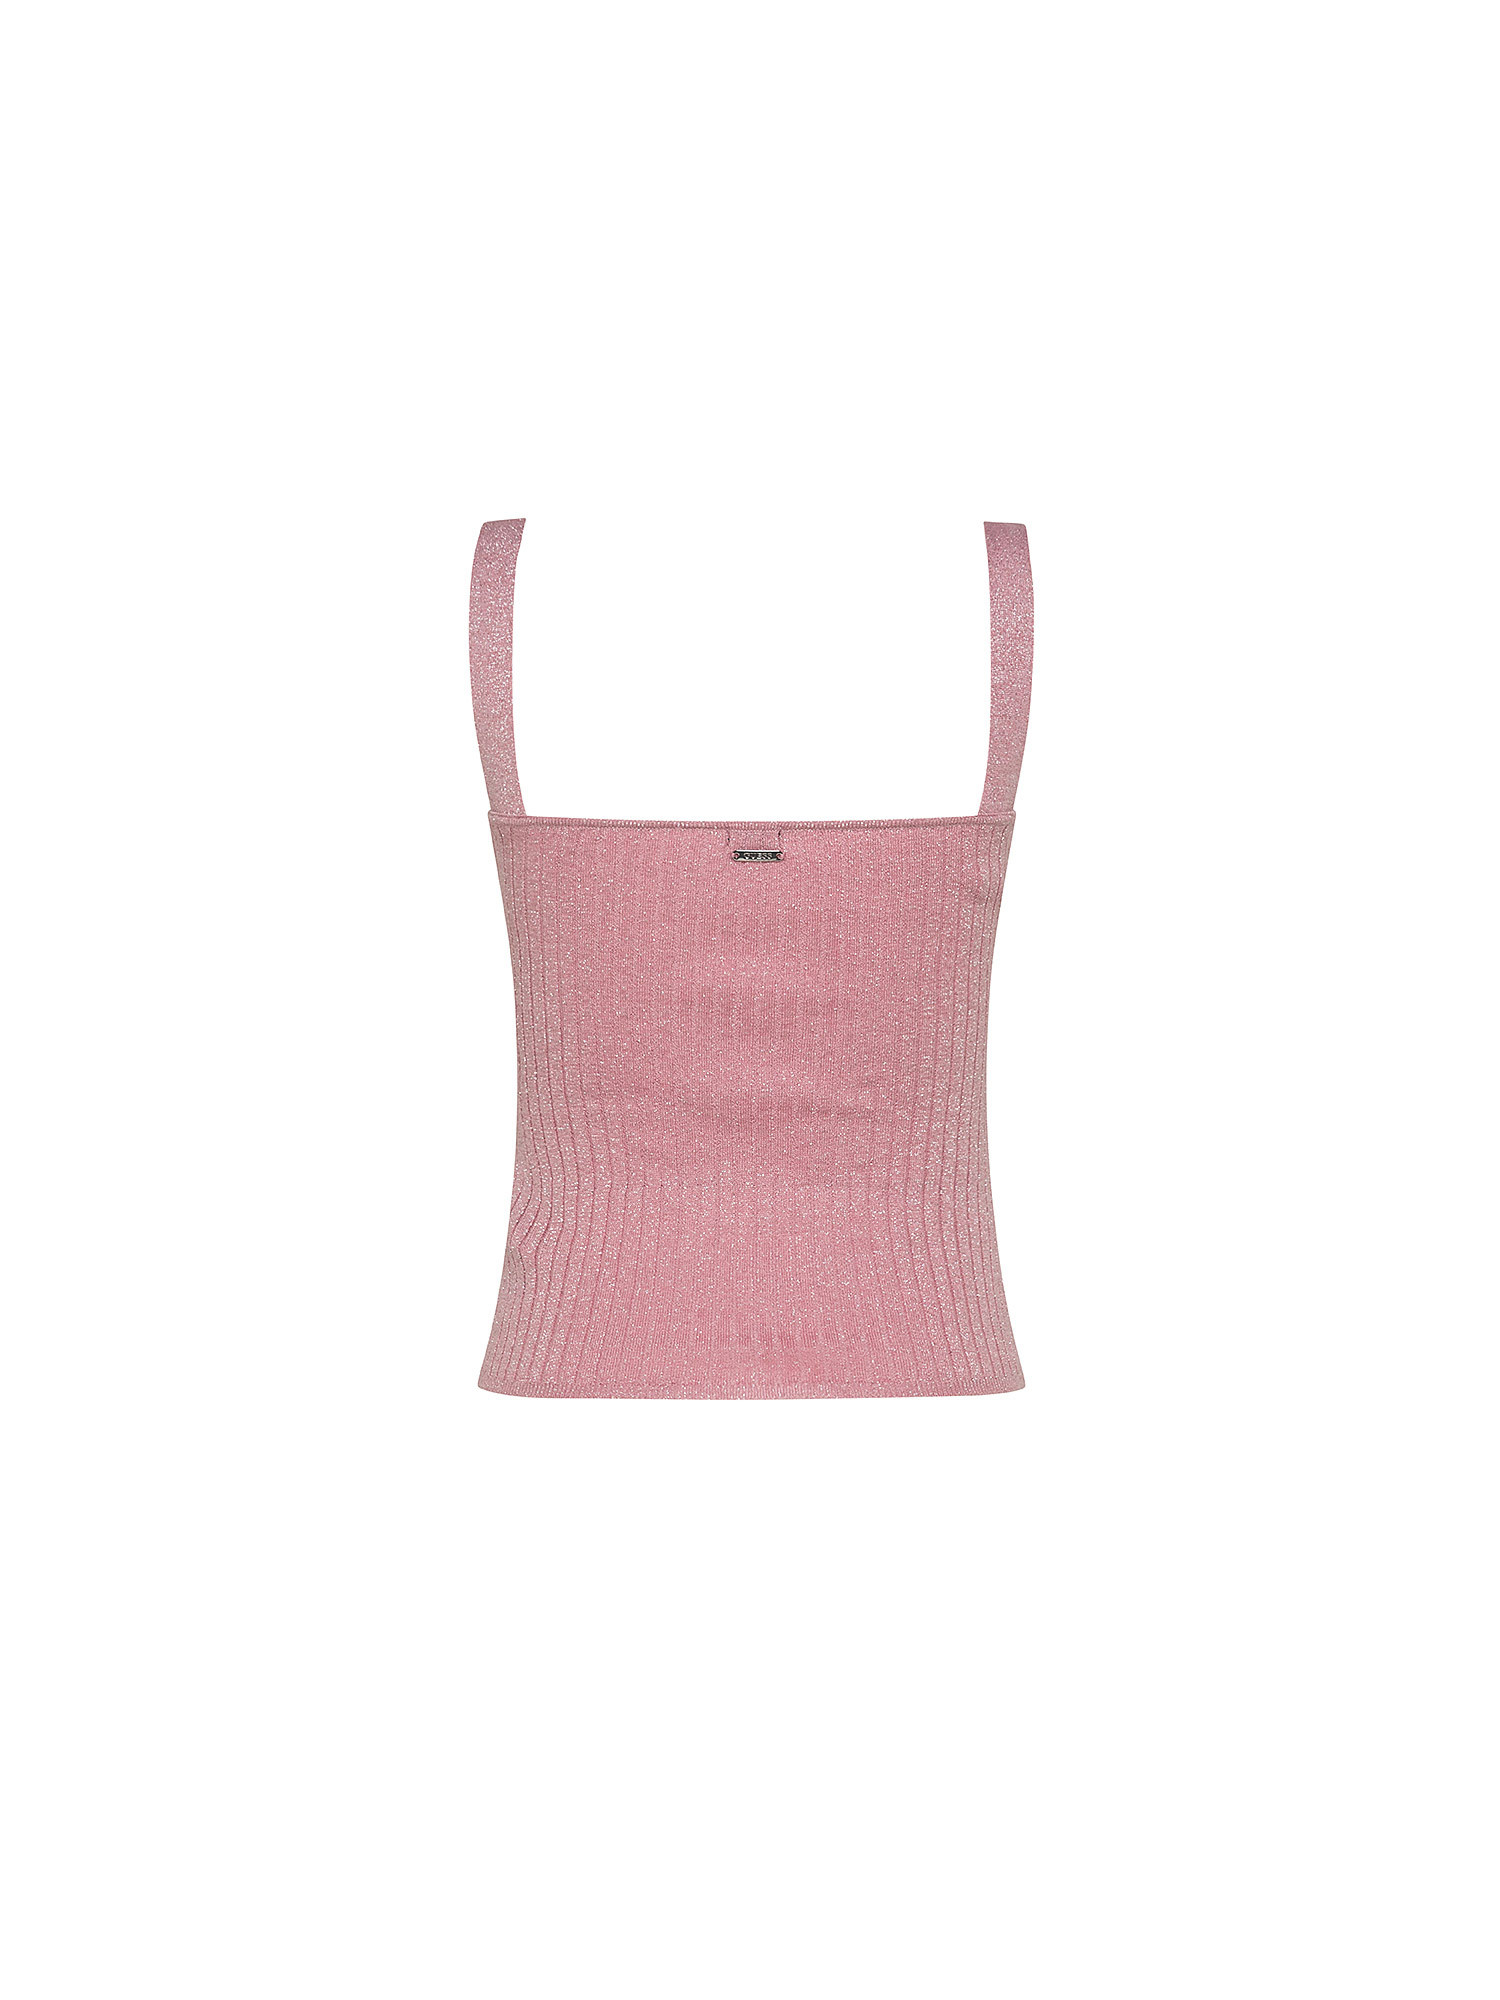 Canotta in maglia, Rosa, large image number 1